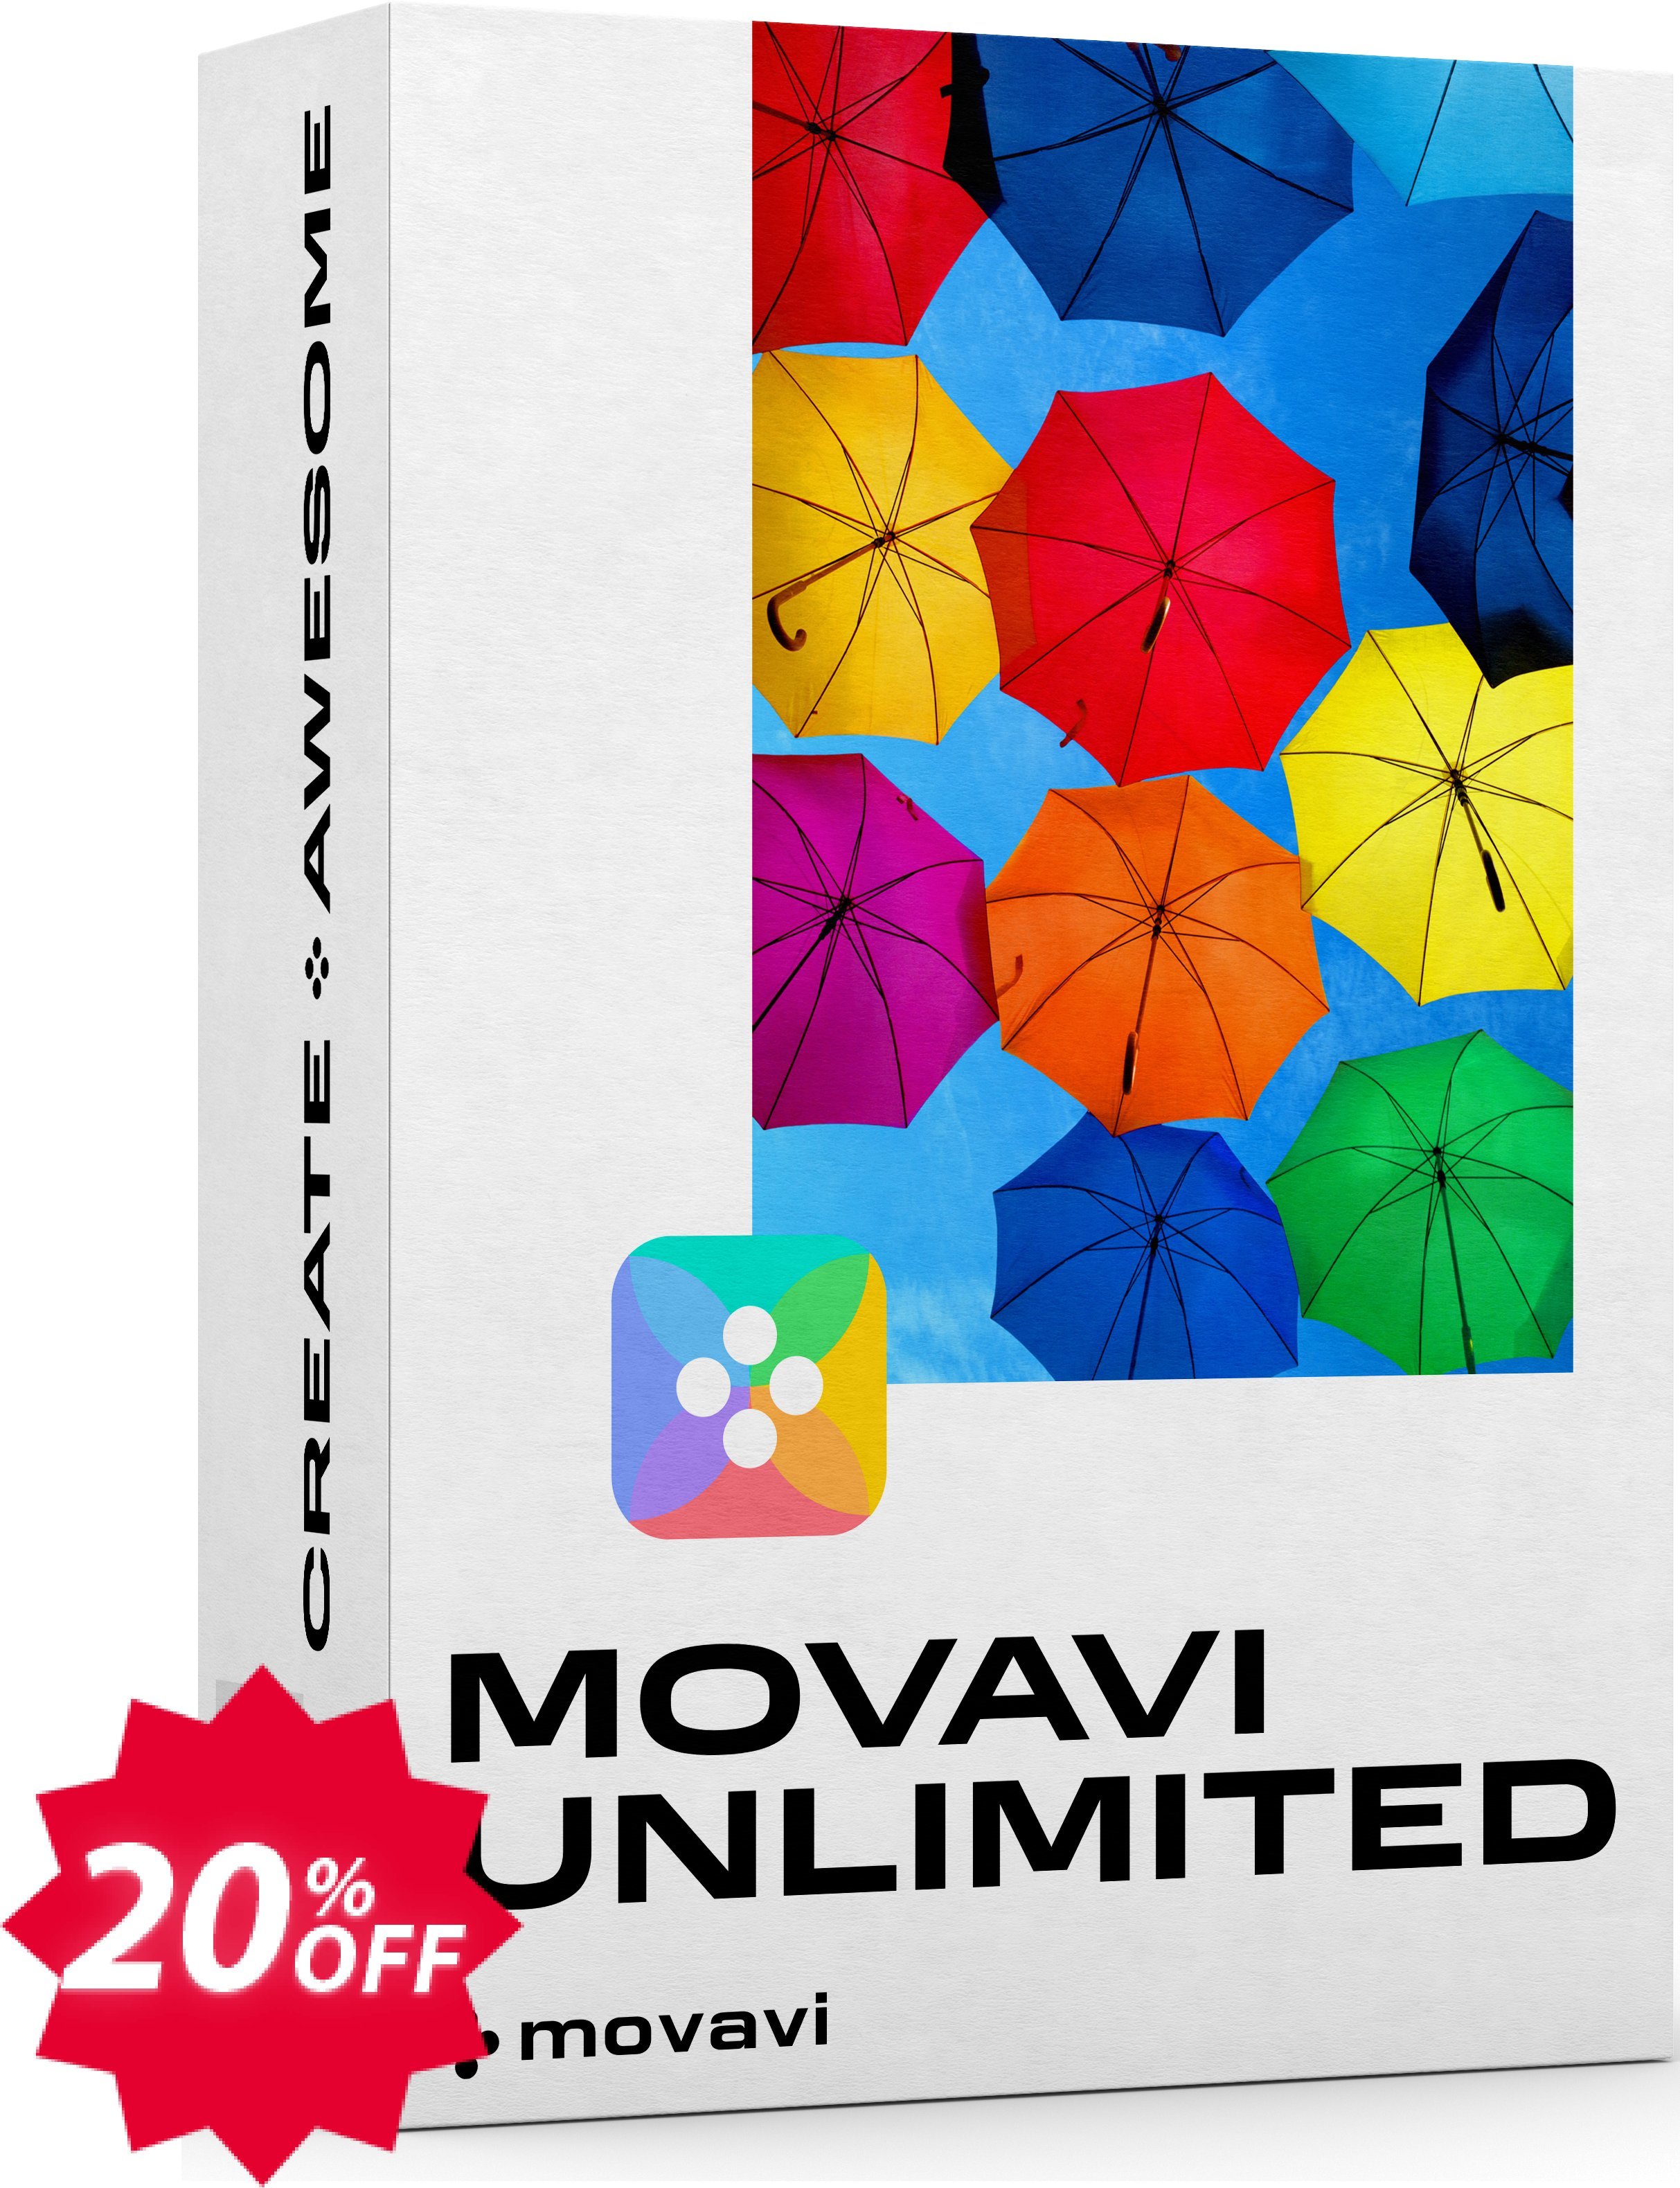 Movavi Unlimited for MAC Coupon code 20% discount 